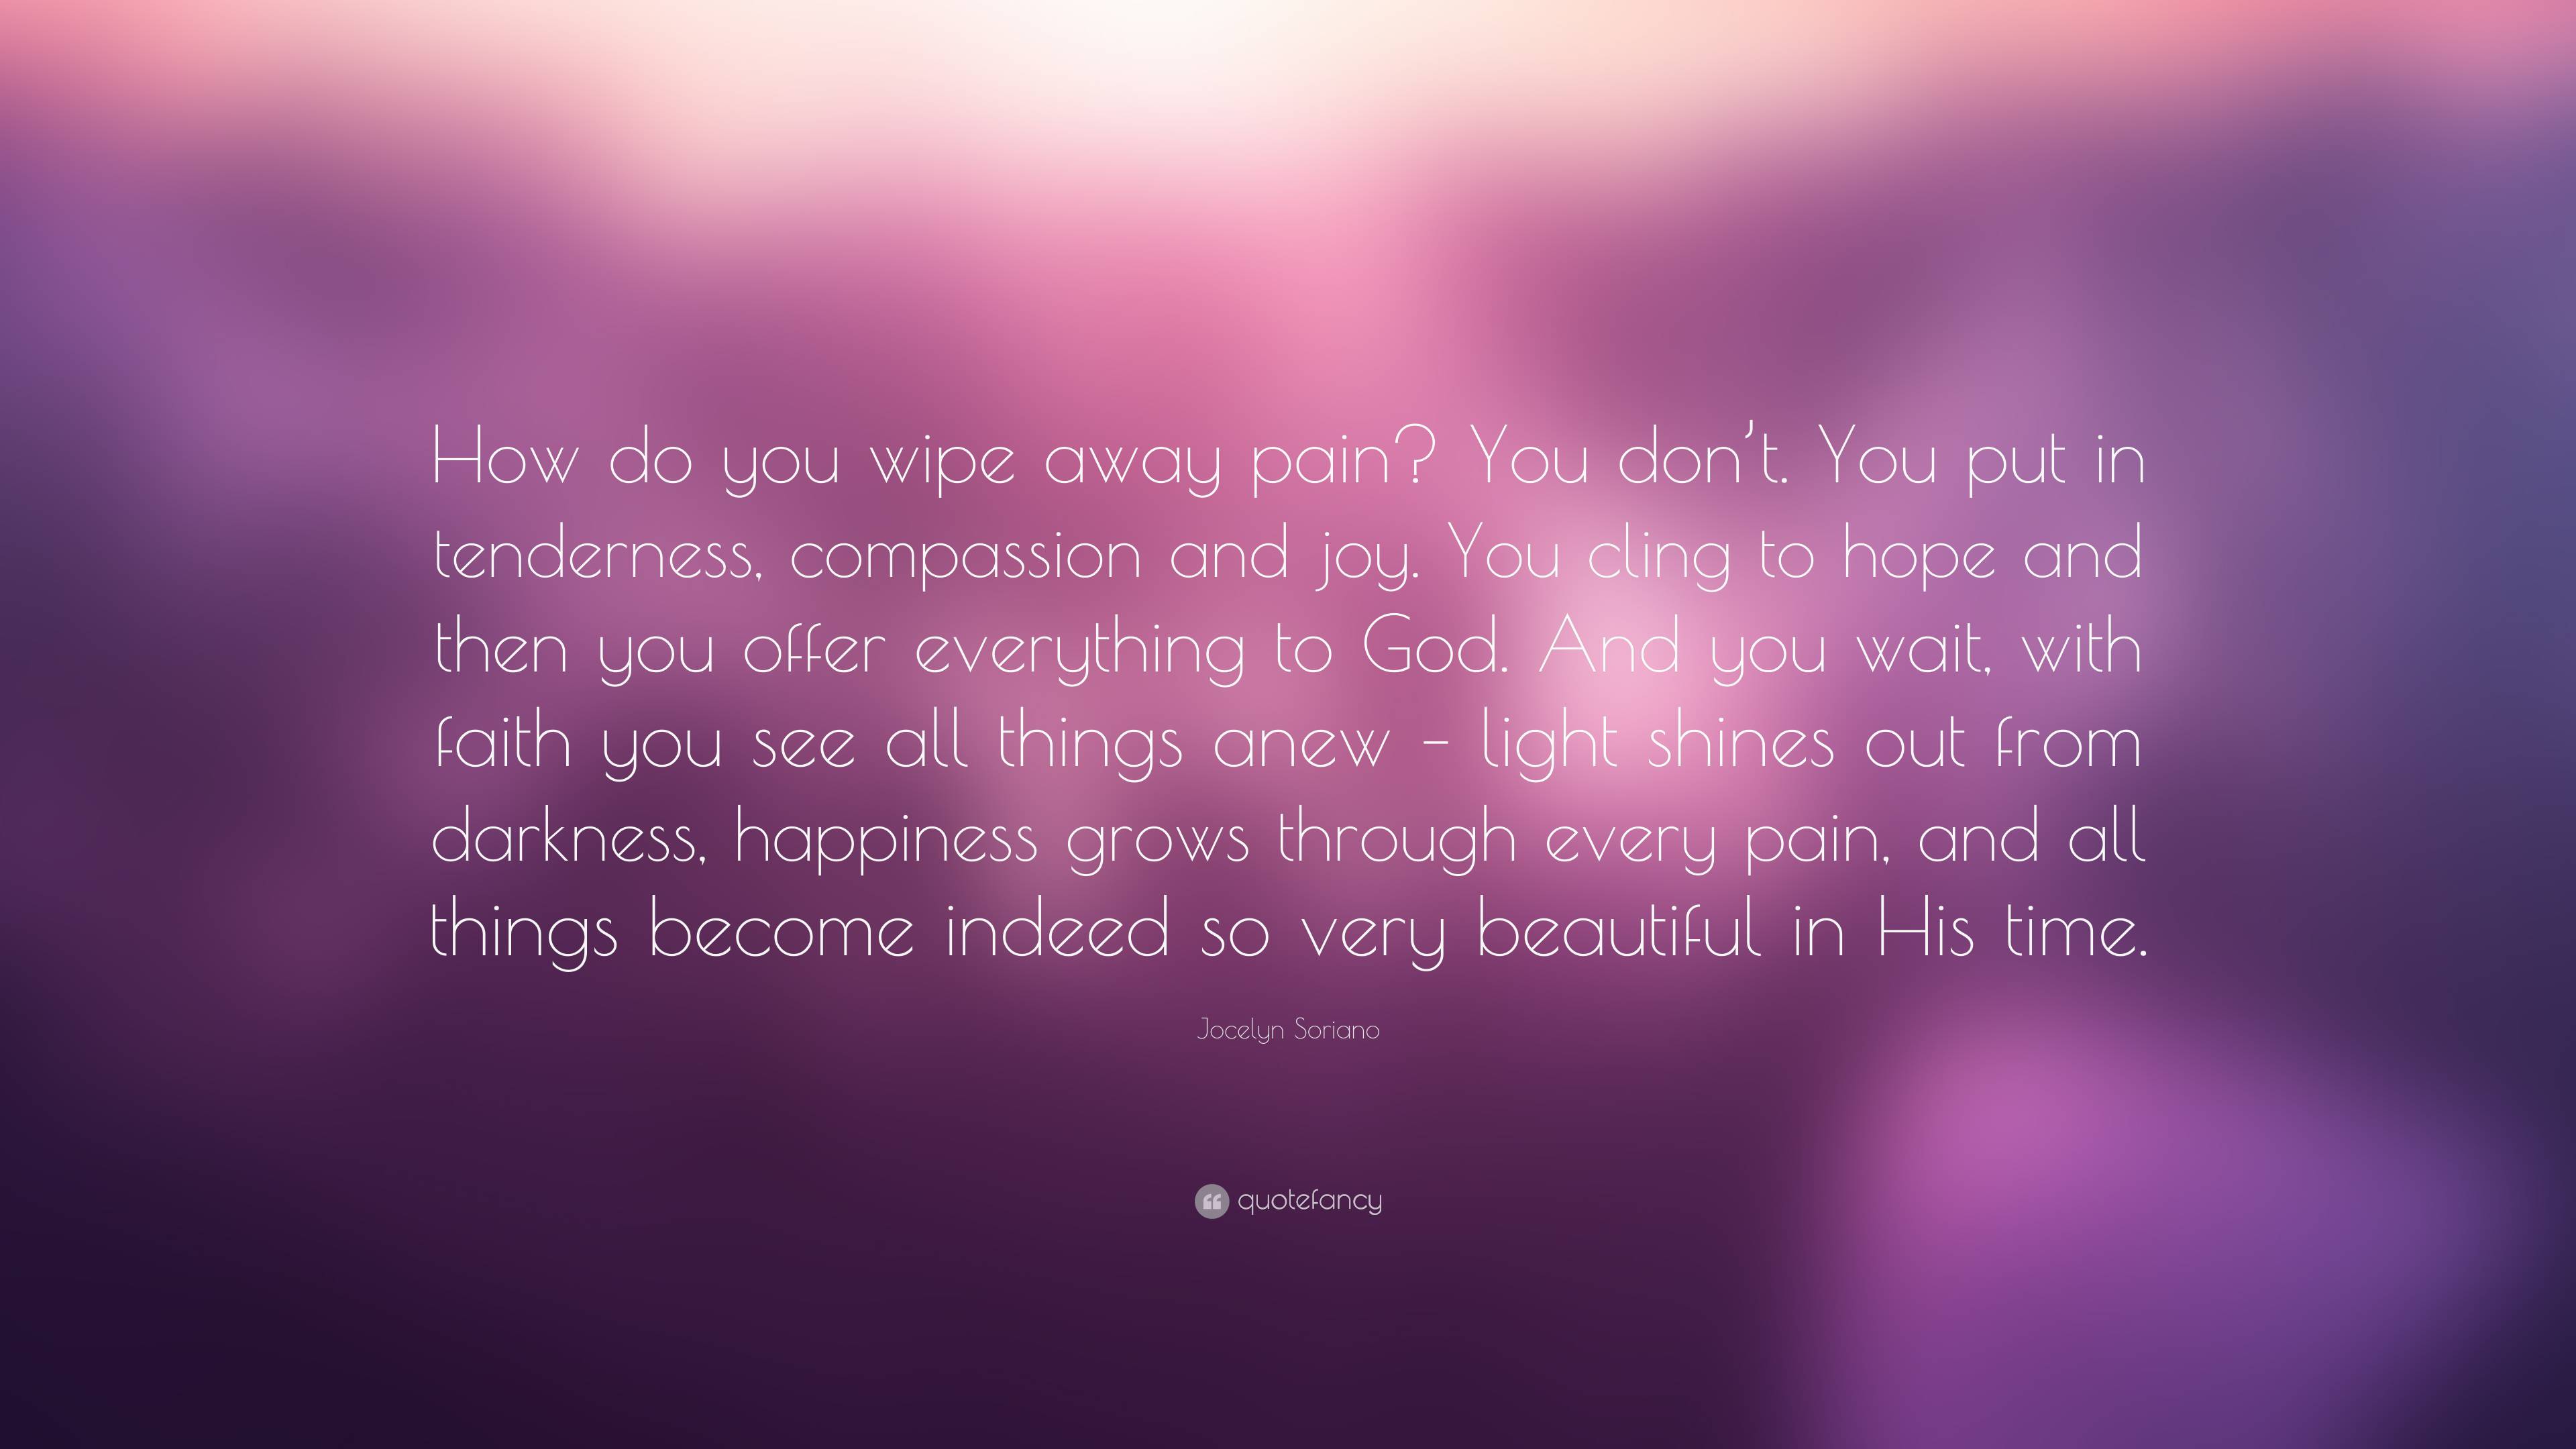 Jocelyn Soriano Quote: “How do you wipe away pain? You don’t. You put ...